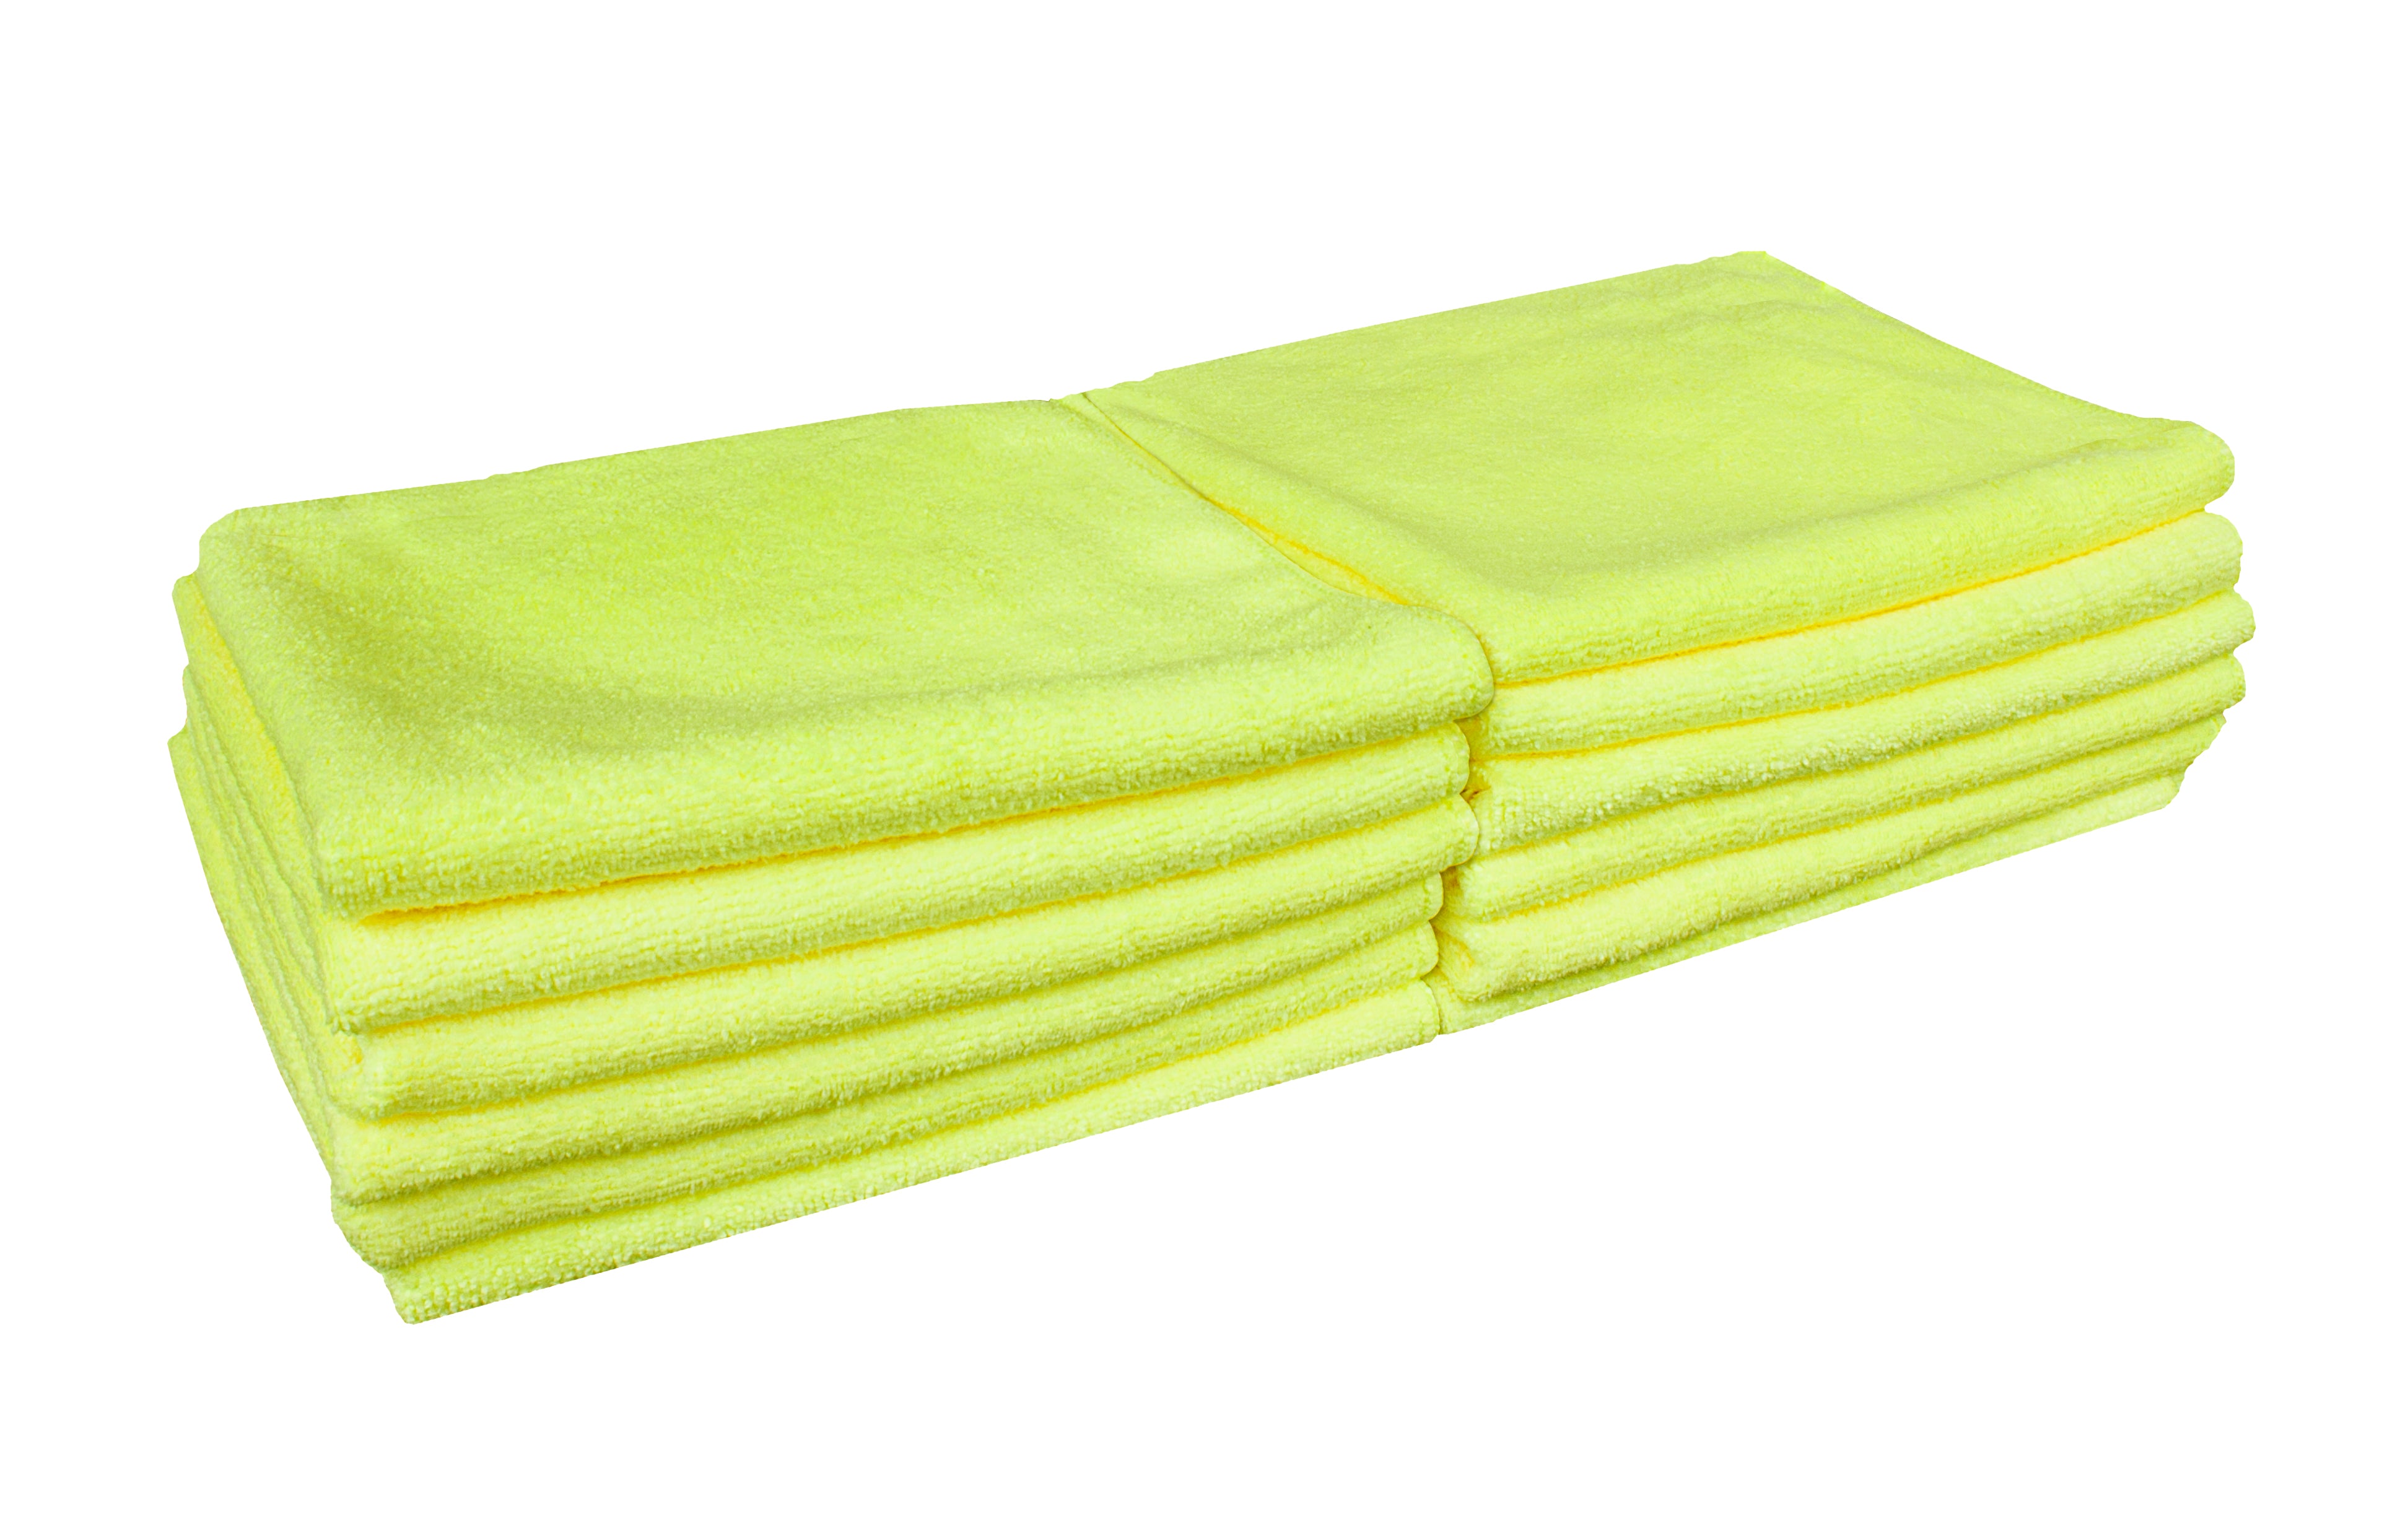 Dimeho 16 Pack Premium Microfiber Cleaning Cloths, Absorbent